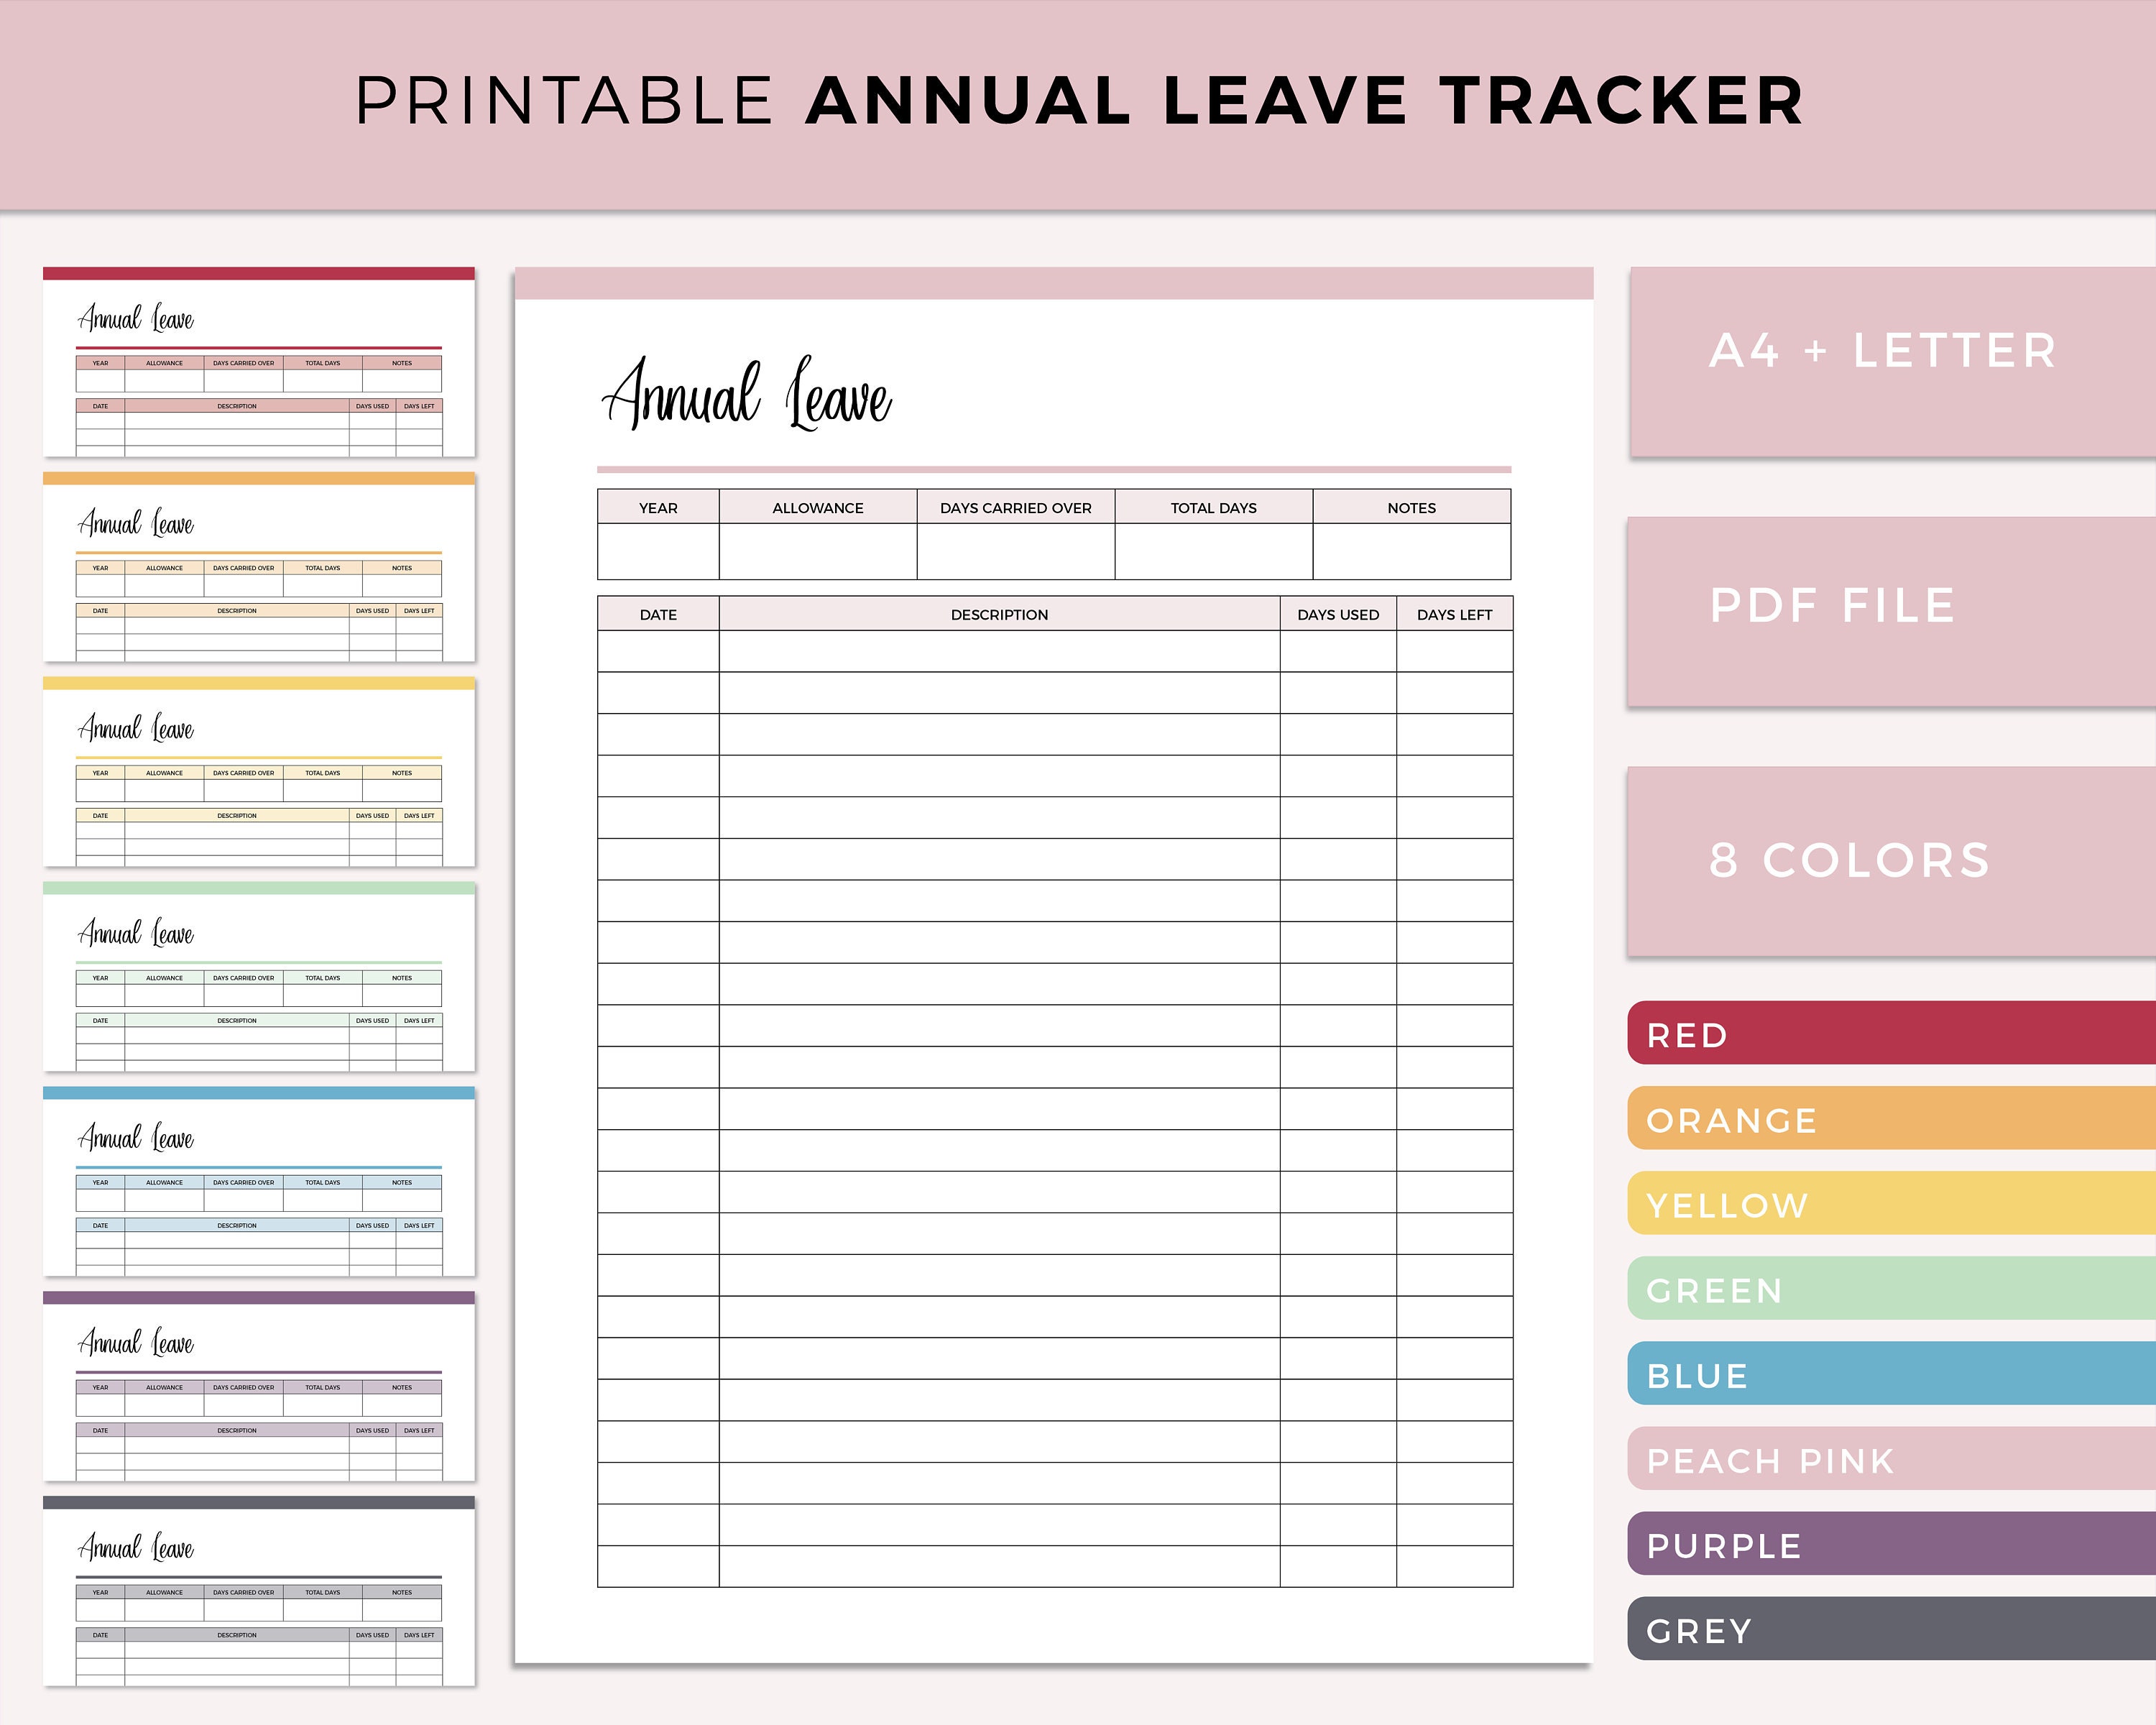 Annual Leave Tracker Printable, Work Leave Tracker, Work Holiday